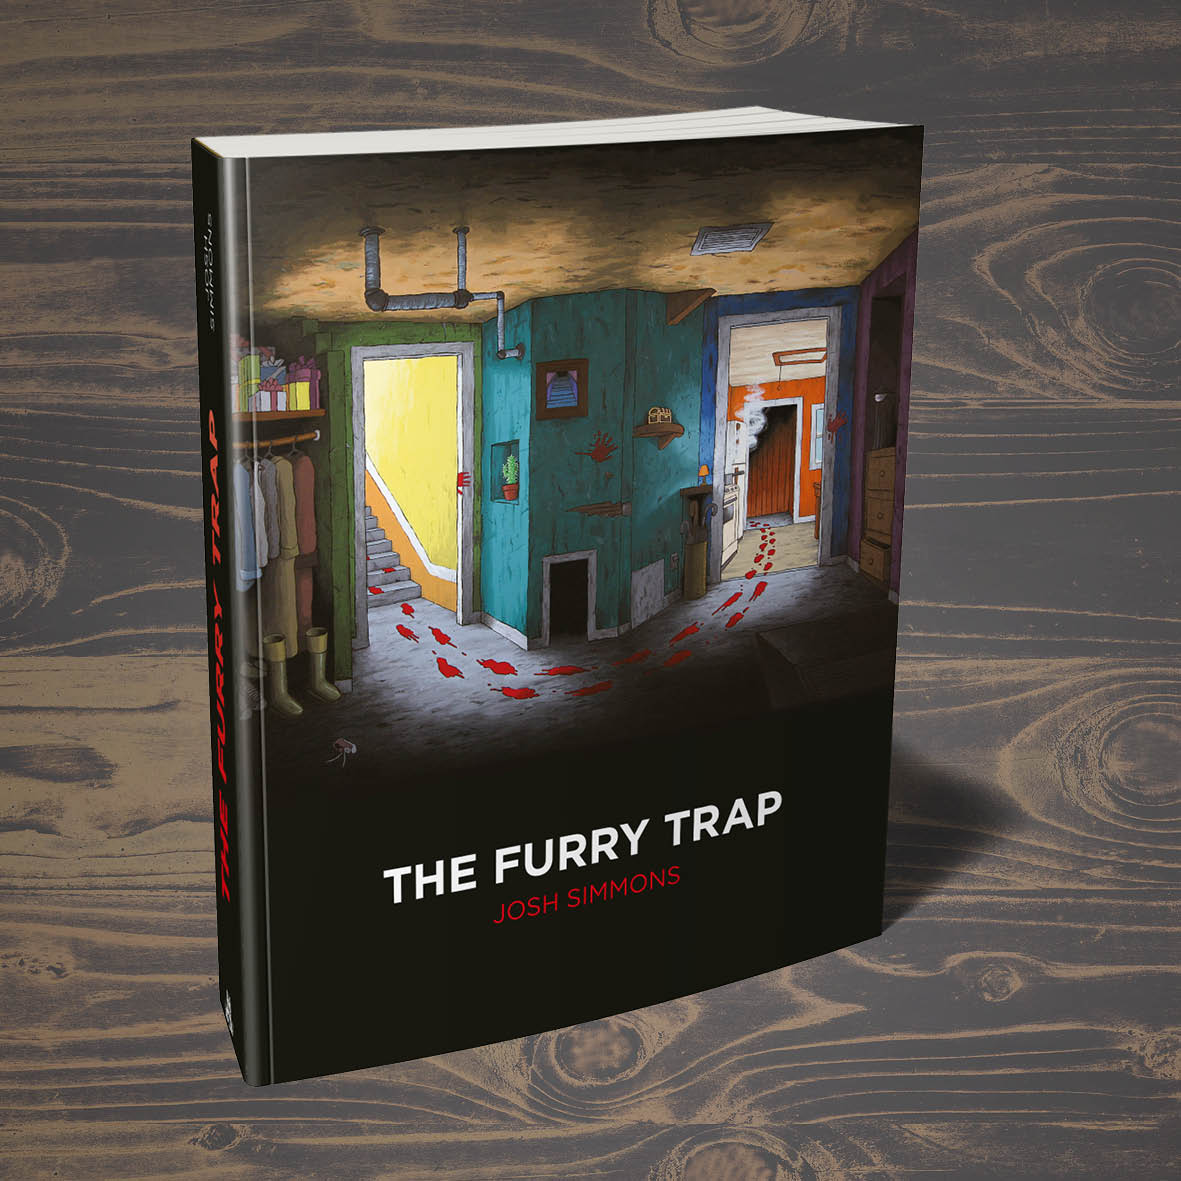 The Furry trap by Josh Simmons